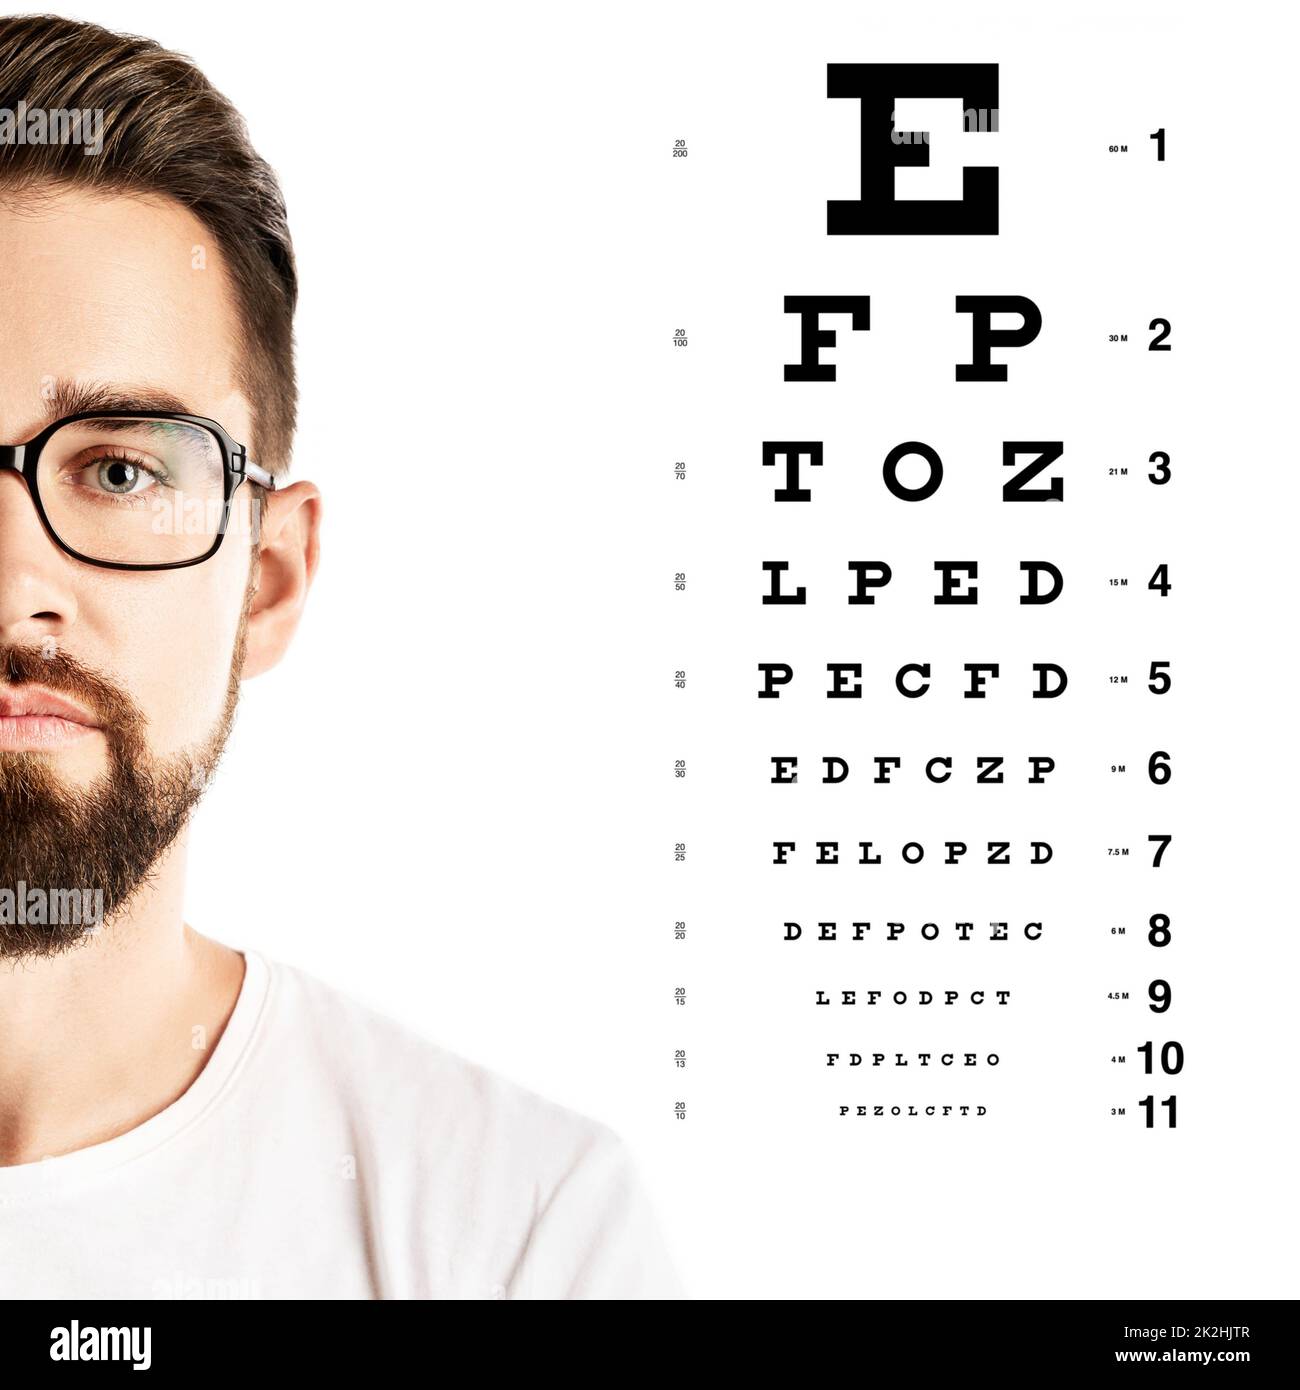 Man wearing eyeglasses and eye chart for visual acuity test Stock Photo